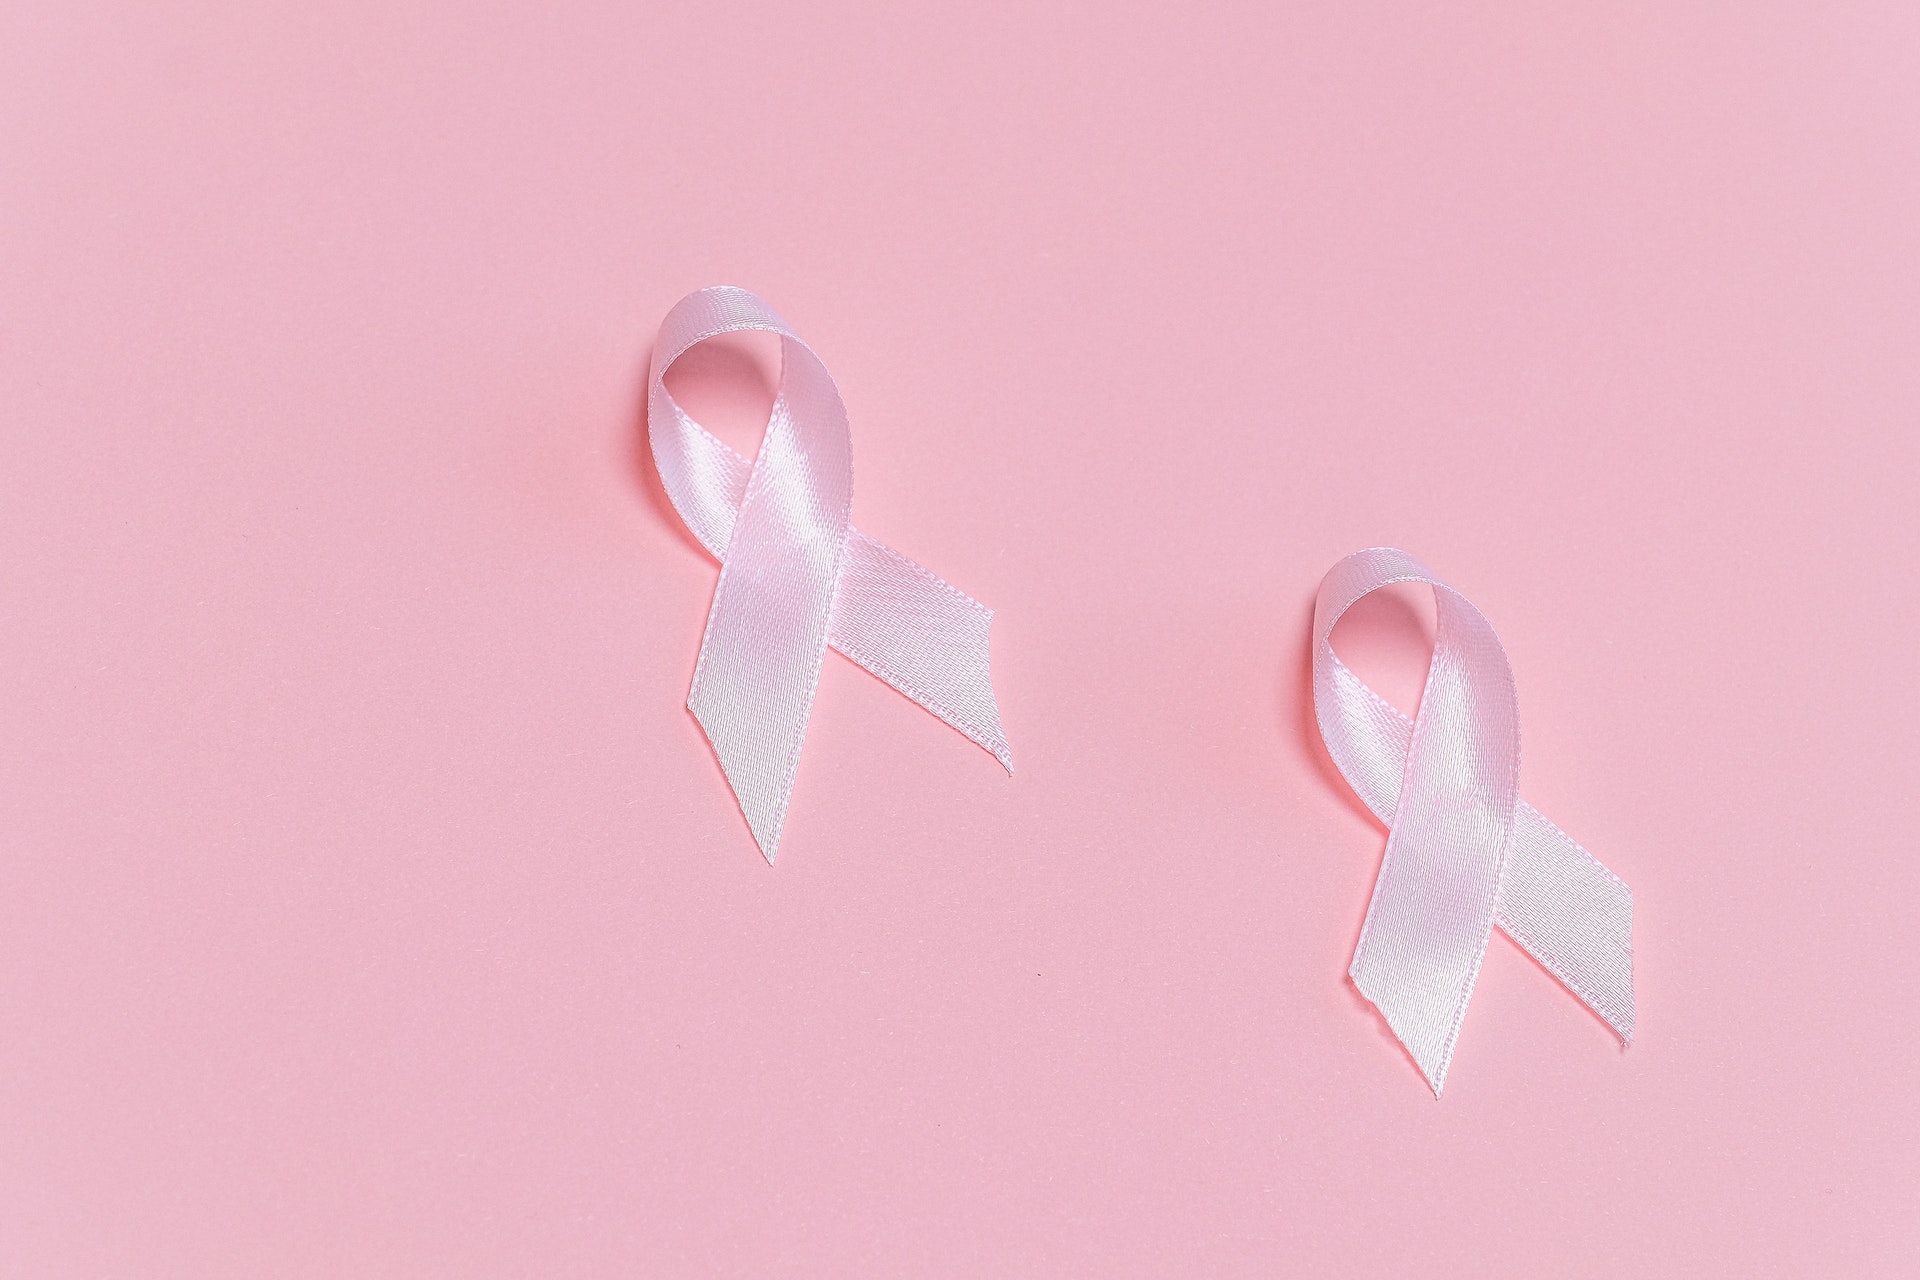 Constructing Cervical Cancer more than a health issue — it’s a gender inequality issue